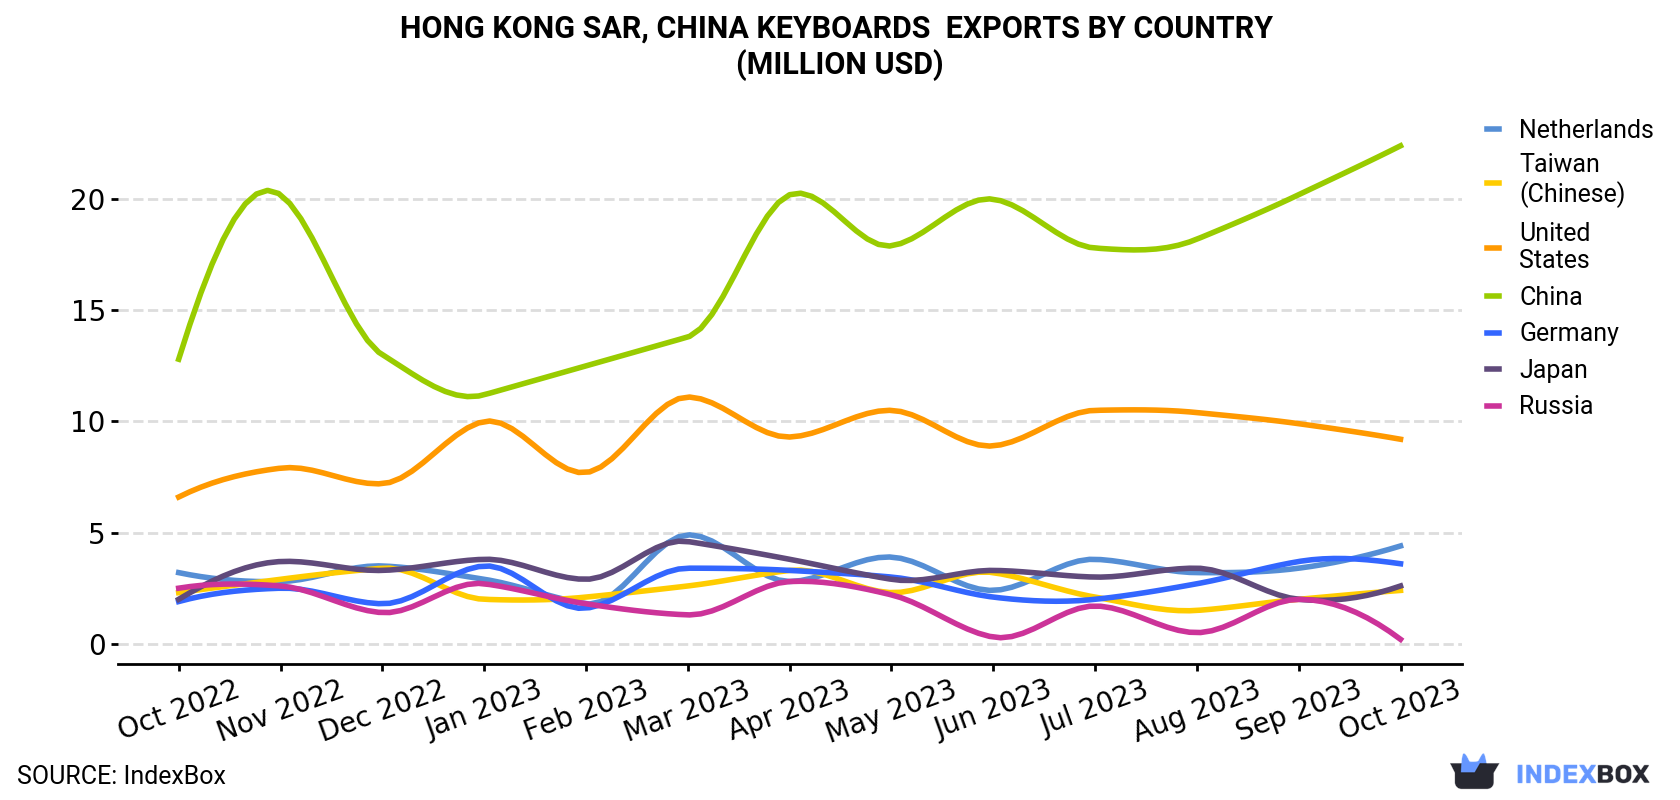 Hong Kong Keyboards Exports By Country (Million USD)